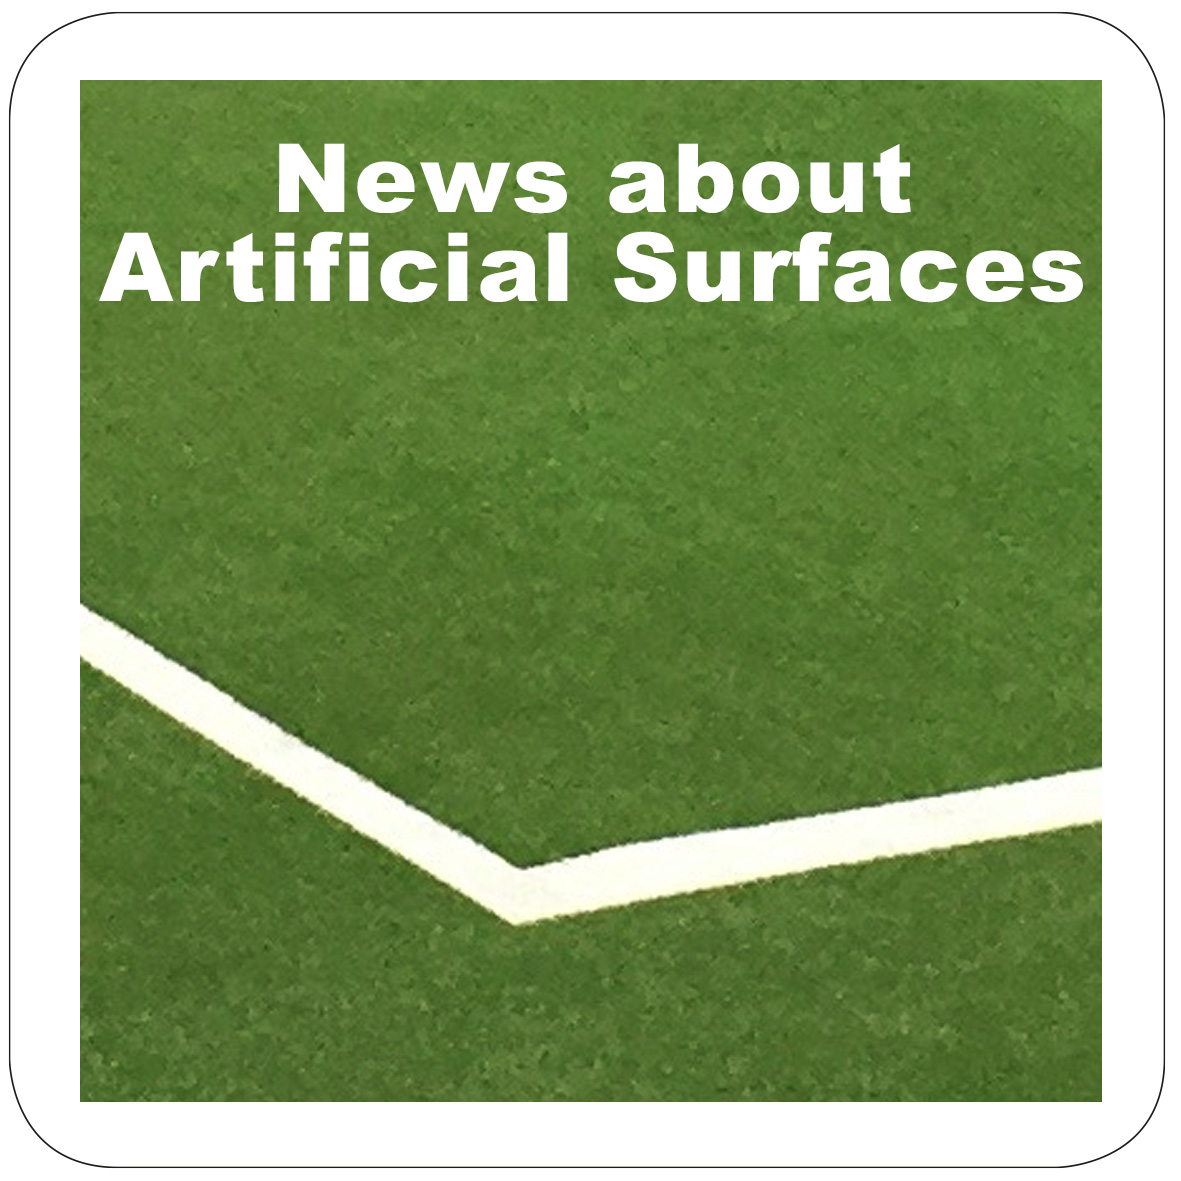 News about Artificial Surfaces